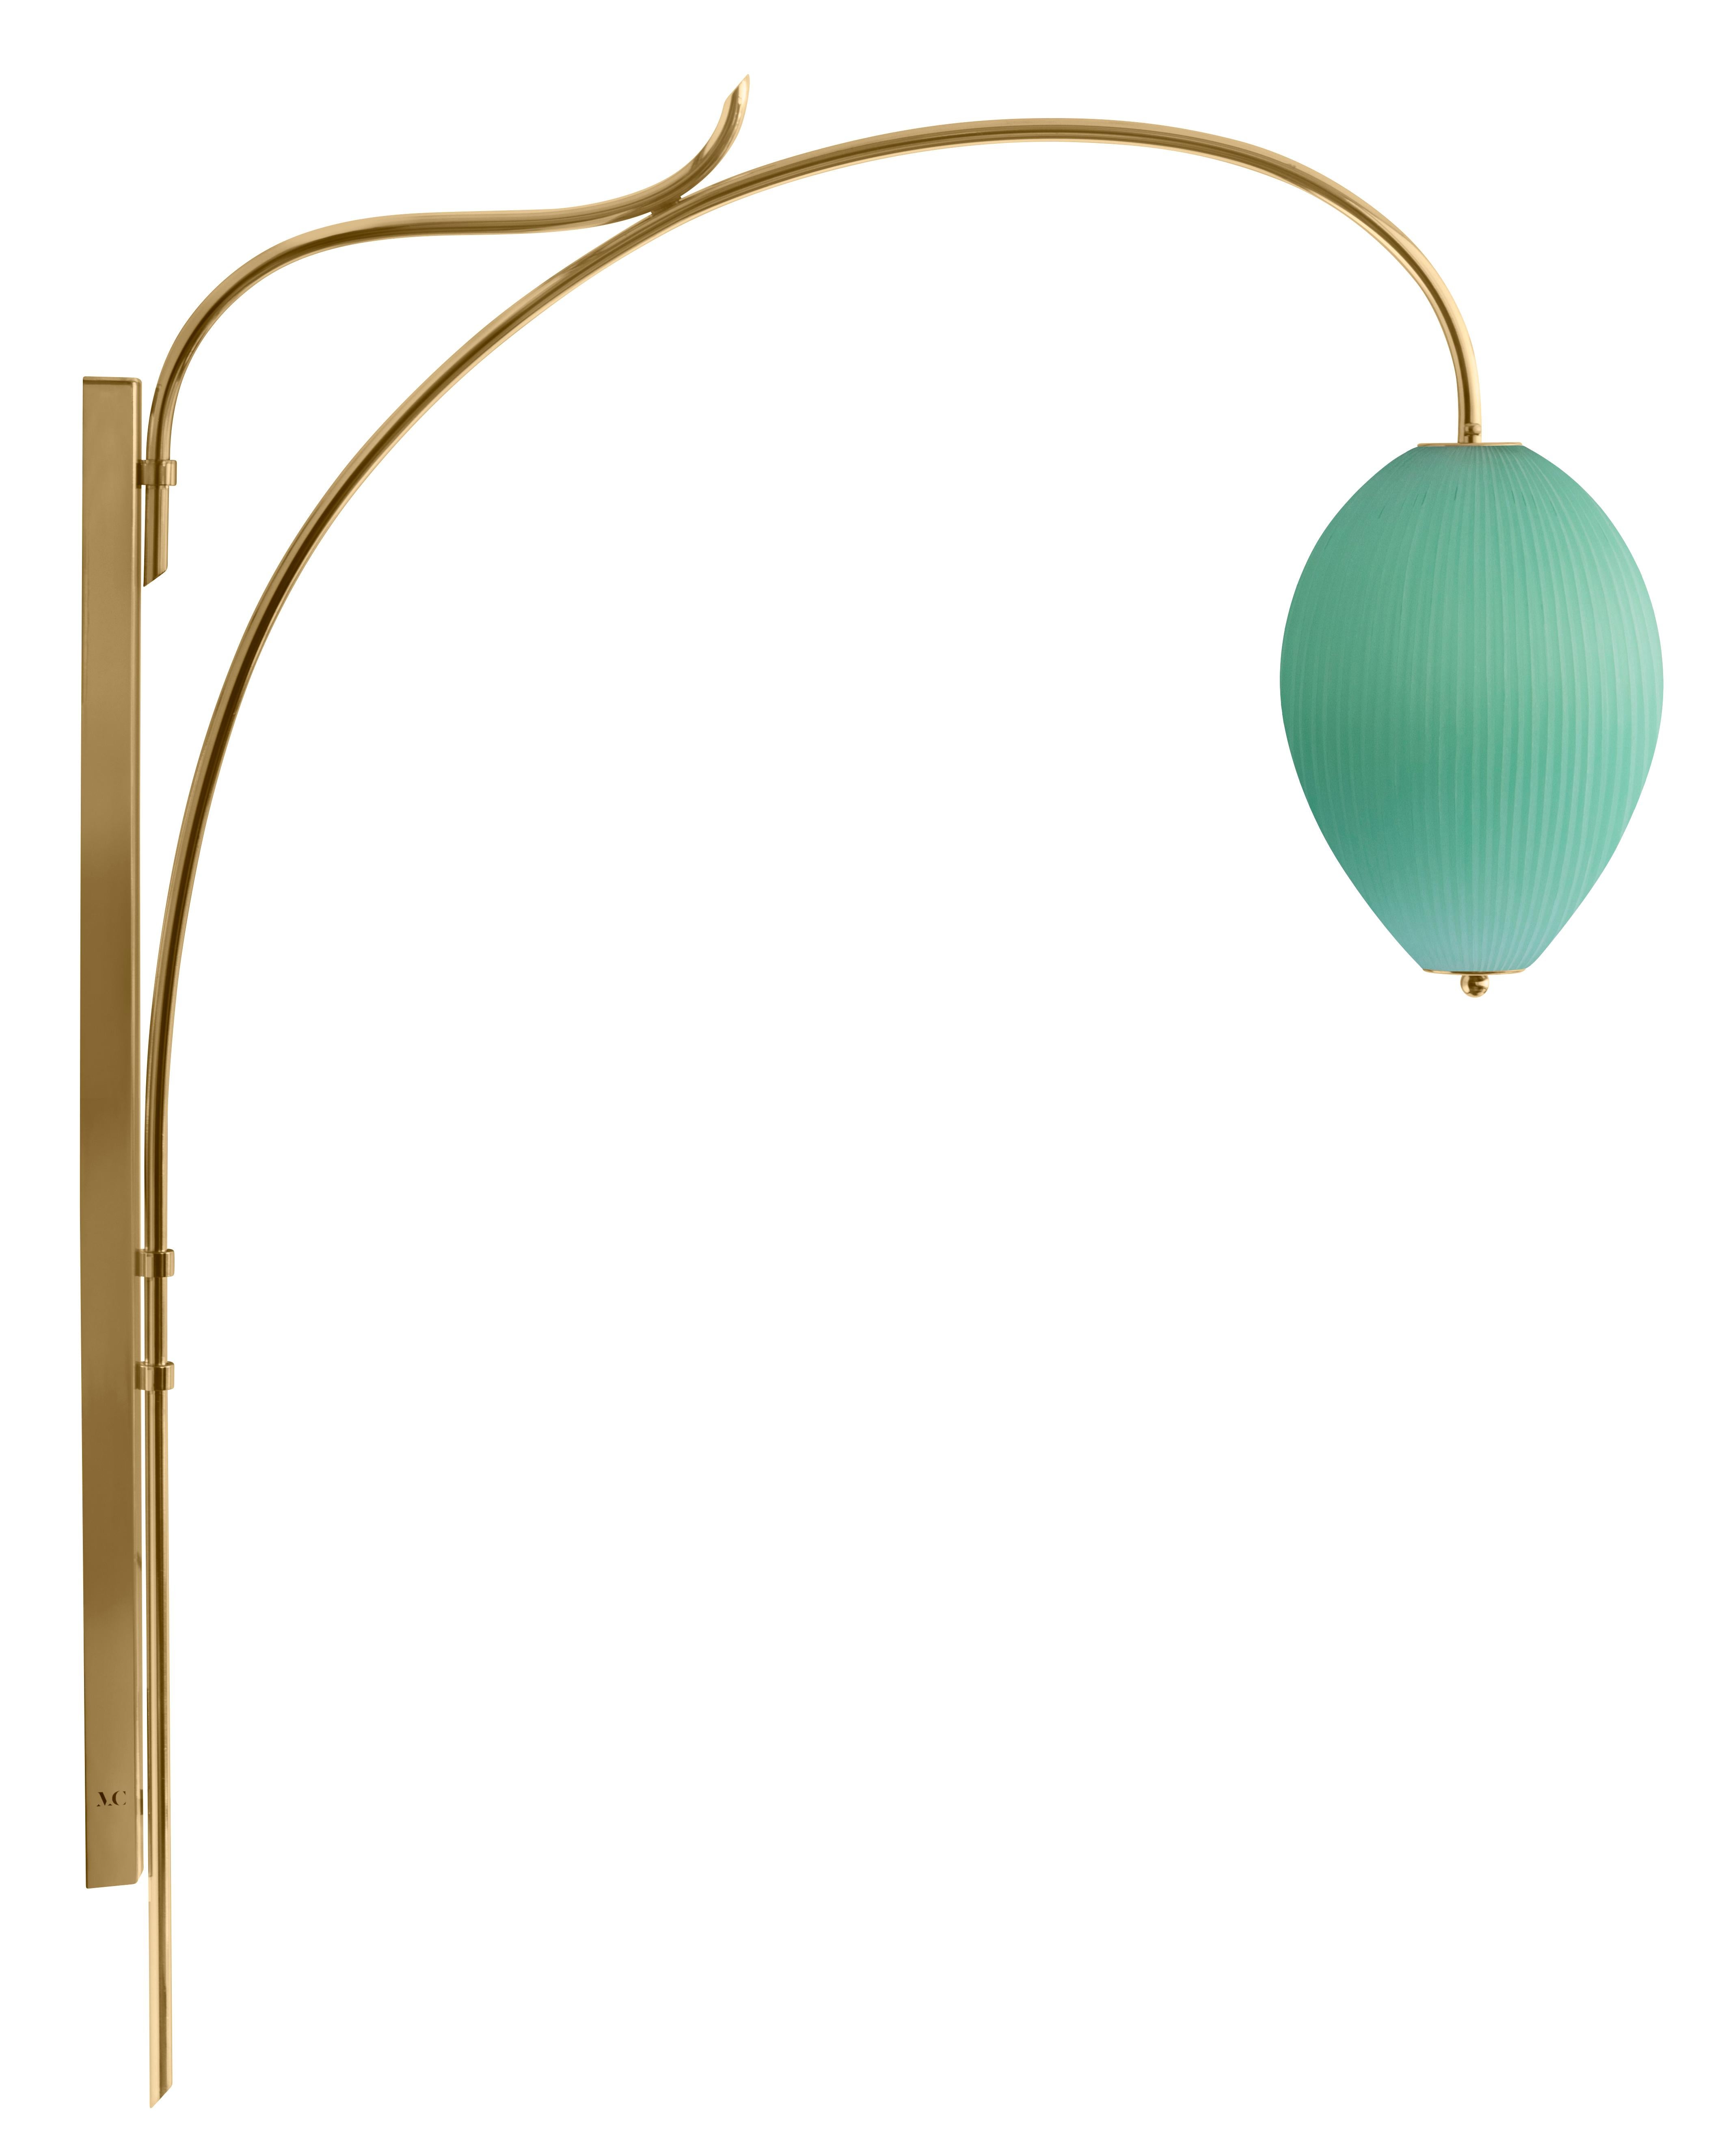 Wall lamp China 10 by Magic Circus Editions
Dimensions: H 134 x W 25.2 x D 113.5 cm
Materials: Brass, mouth blown glass sculpted with a diamond saw
Colour: jade green

Available finishes: Brass, nickel
Available colours: enamel soft white,